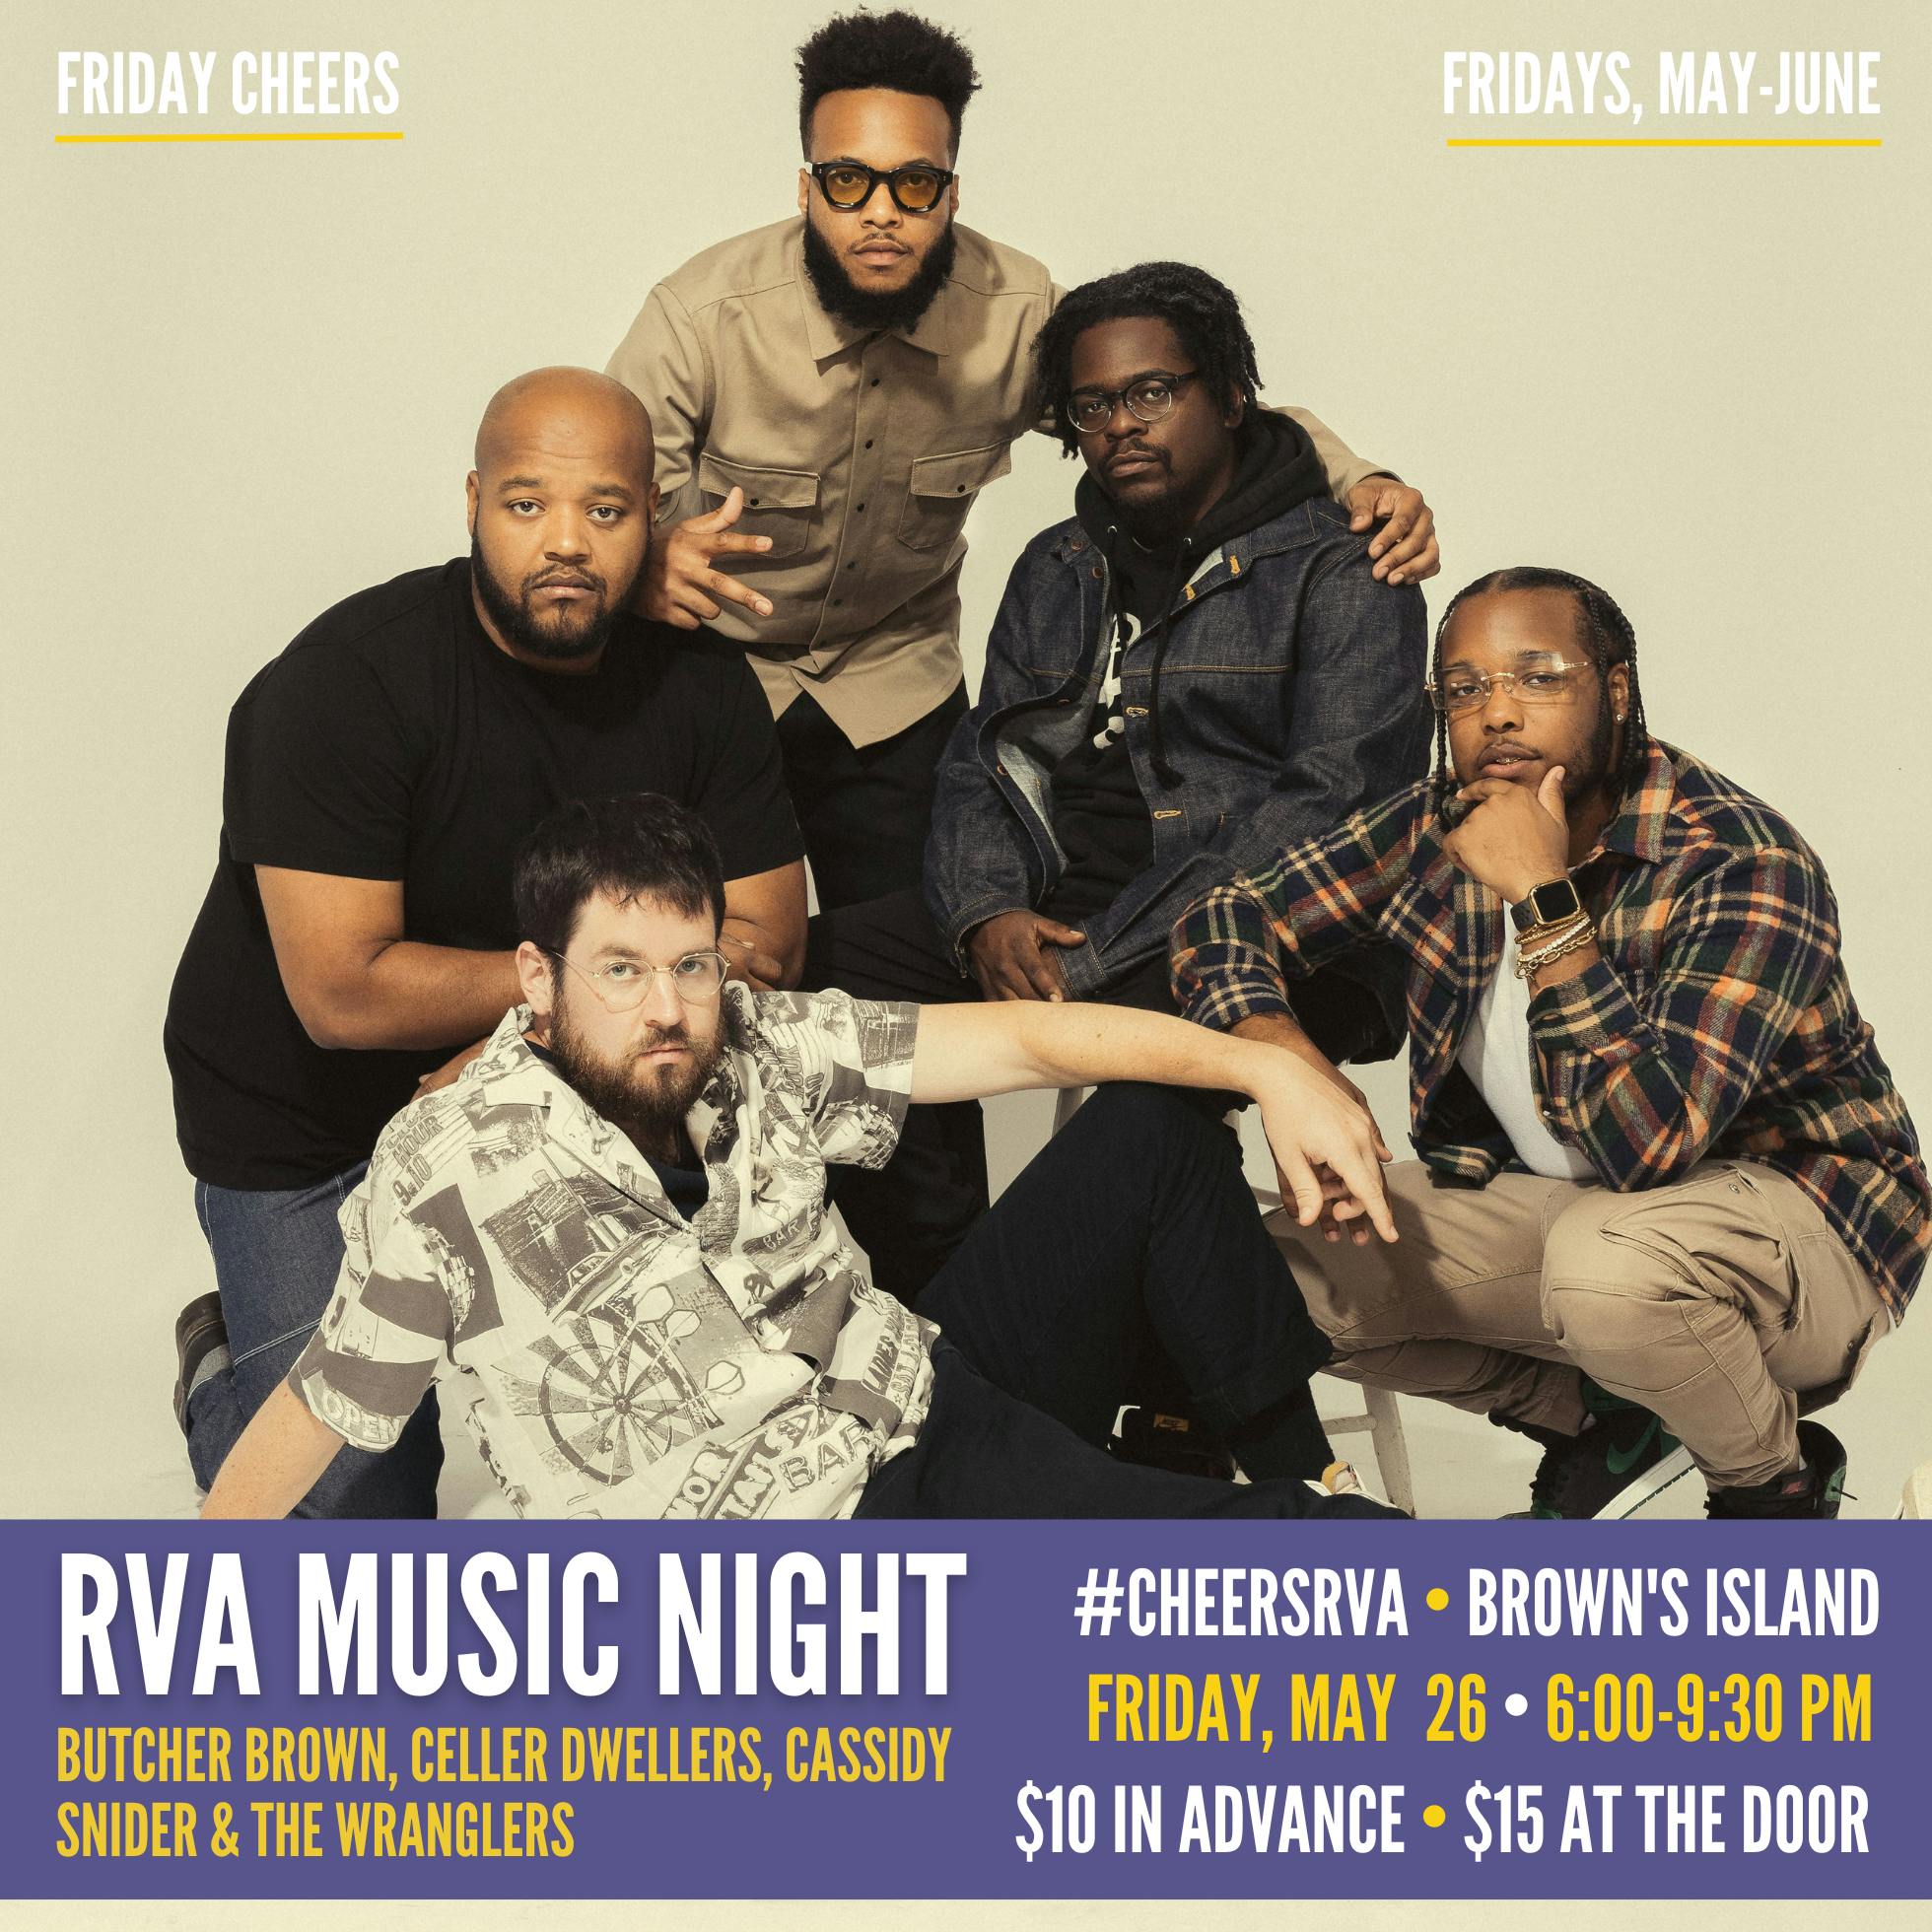 RVA Music Night: Butcher Brown, Celler Dwellers, Cassidy Snider & The Wranglers at Friday Cheers 2023 on Brown's Island